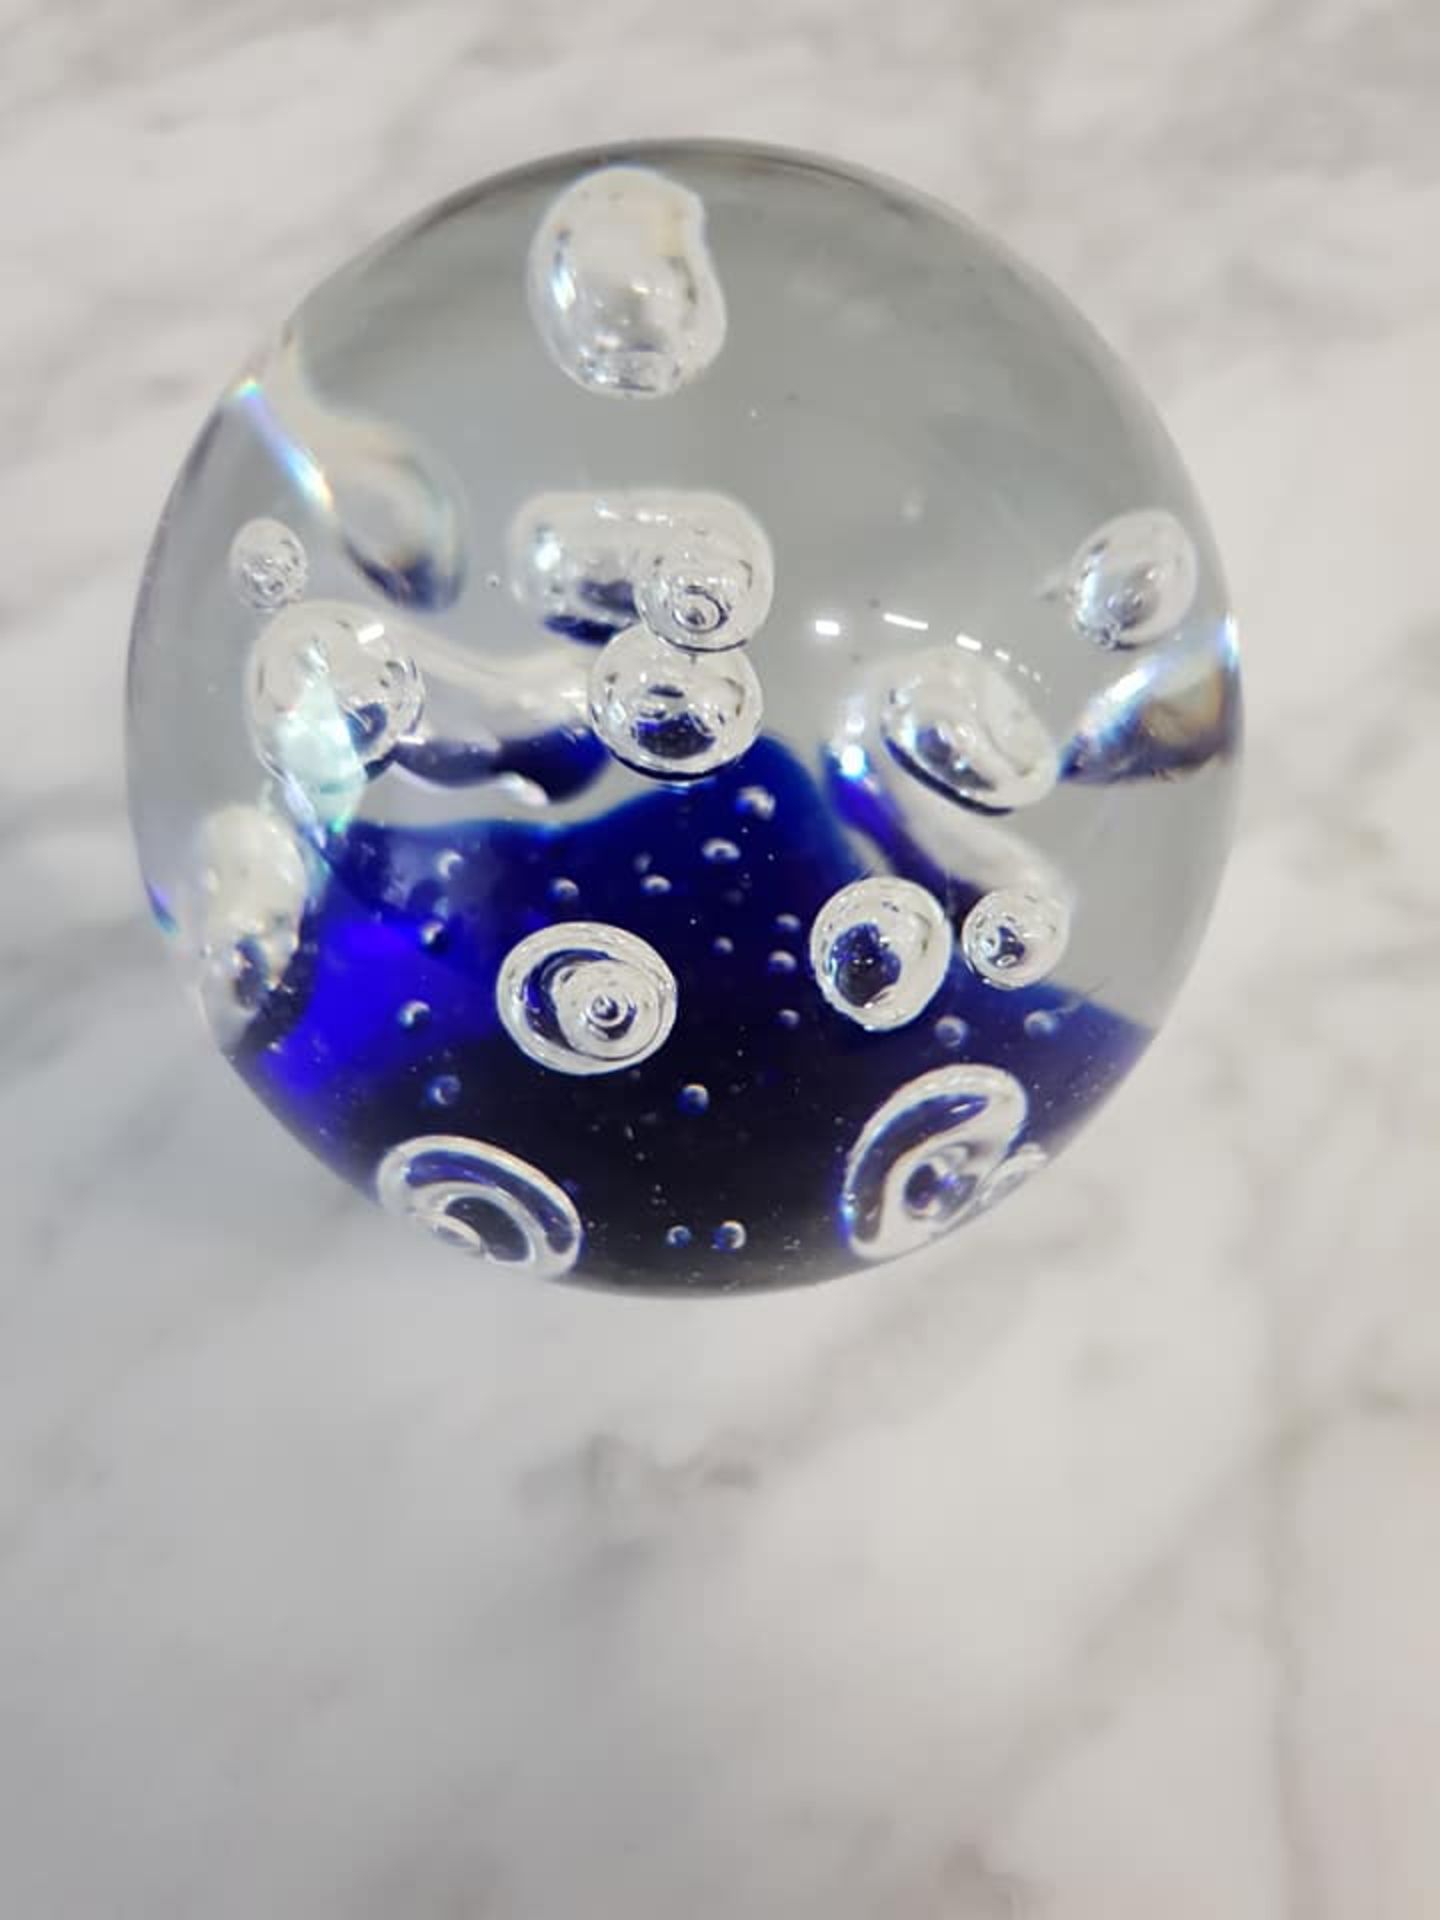 Bohemian blown art glass sphere paperweight 9cm dark navy blue middle with controlled bubbles - Image 2 of 2